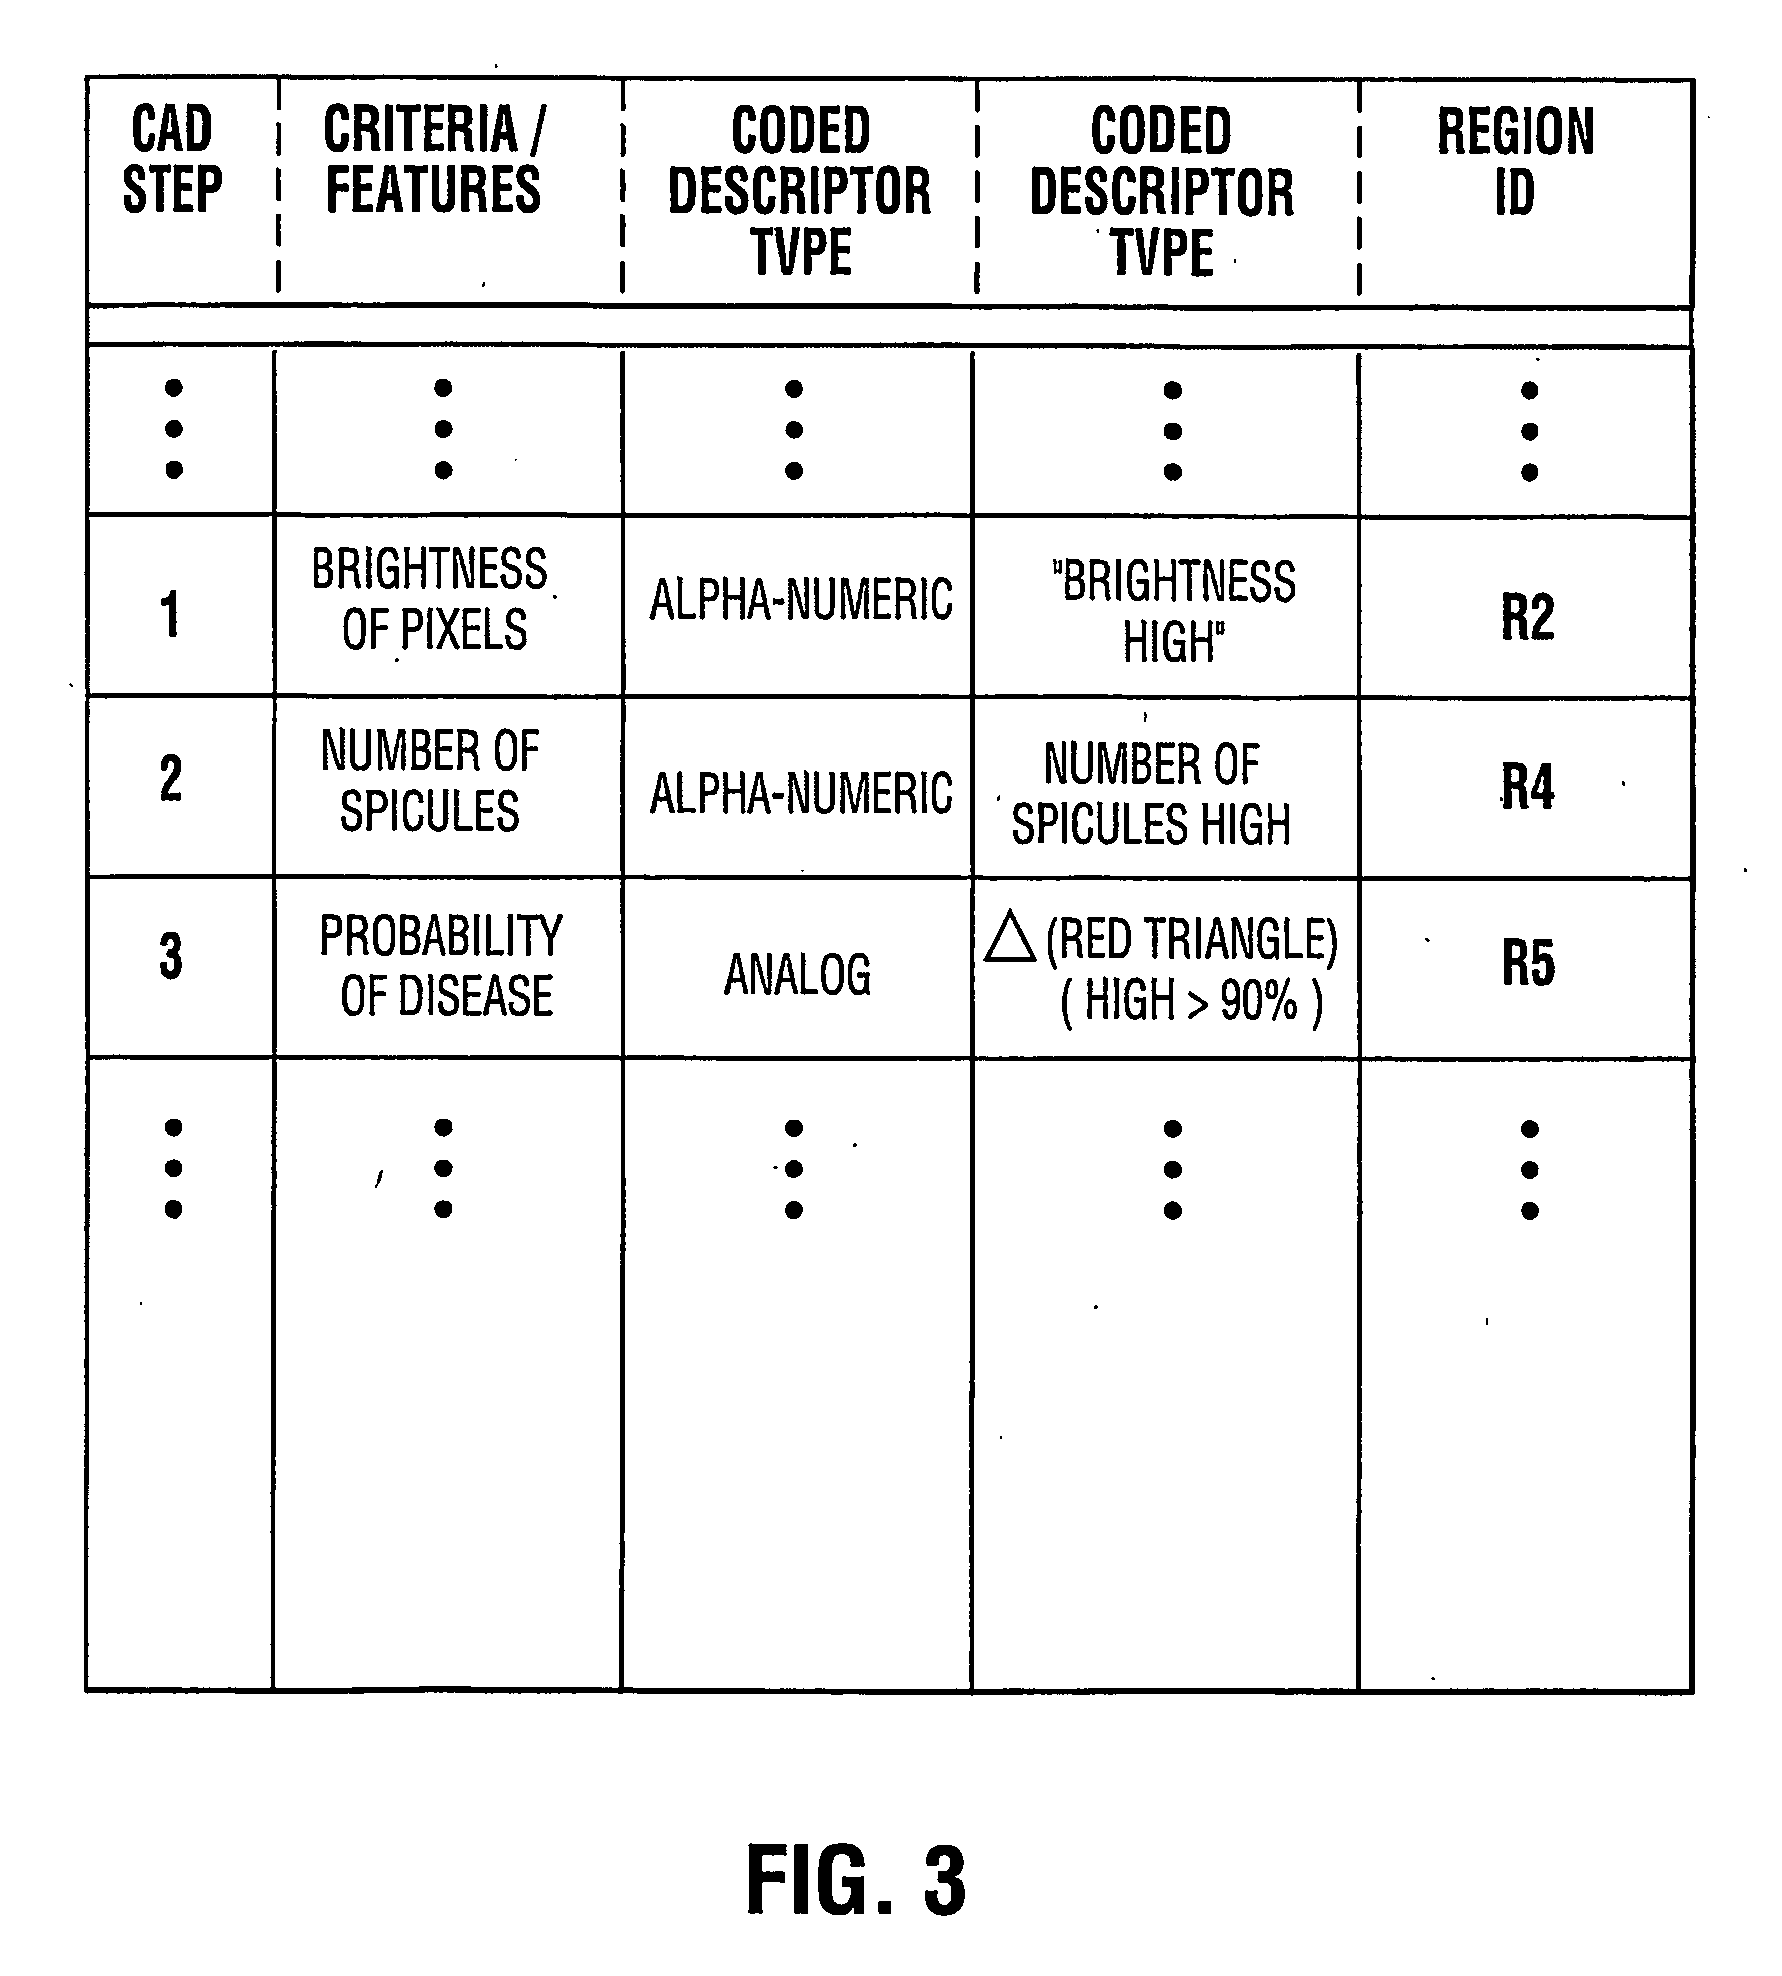 Method and system for computer aided detection (cad) cued reading of medical images